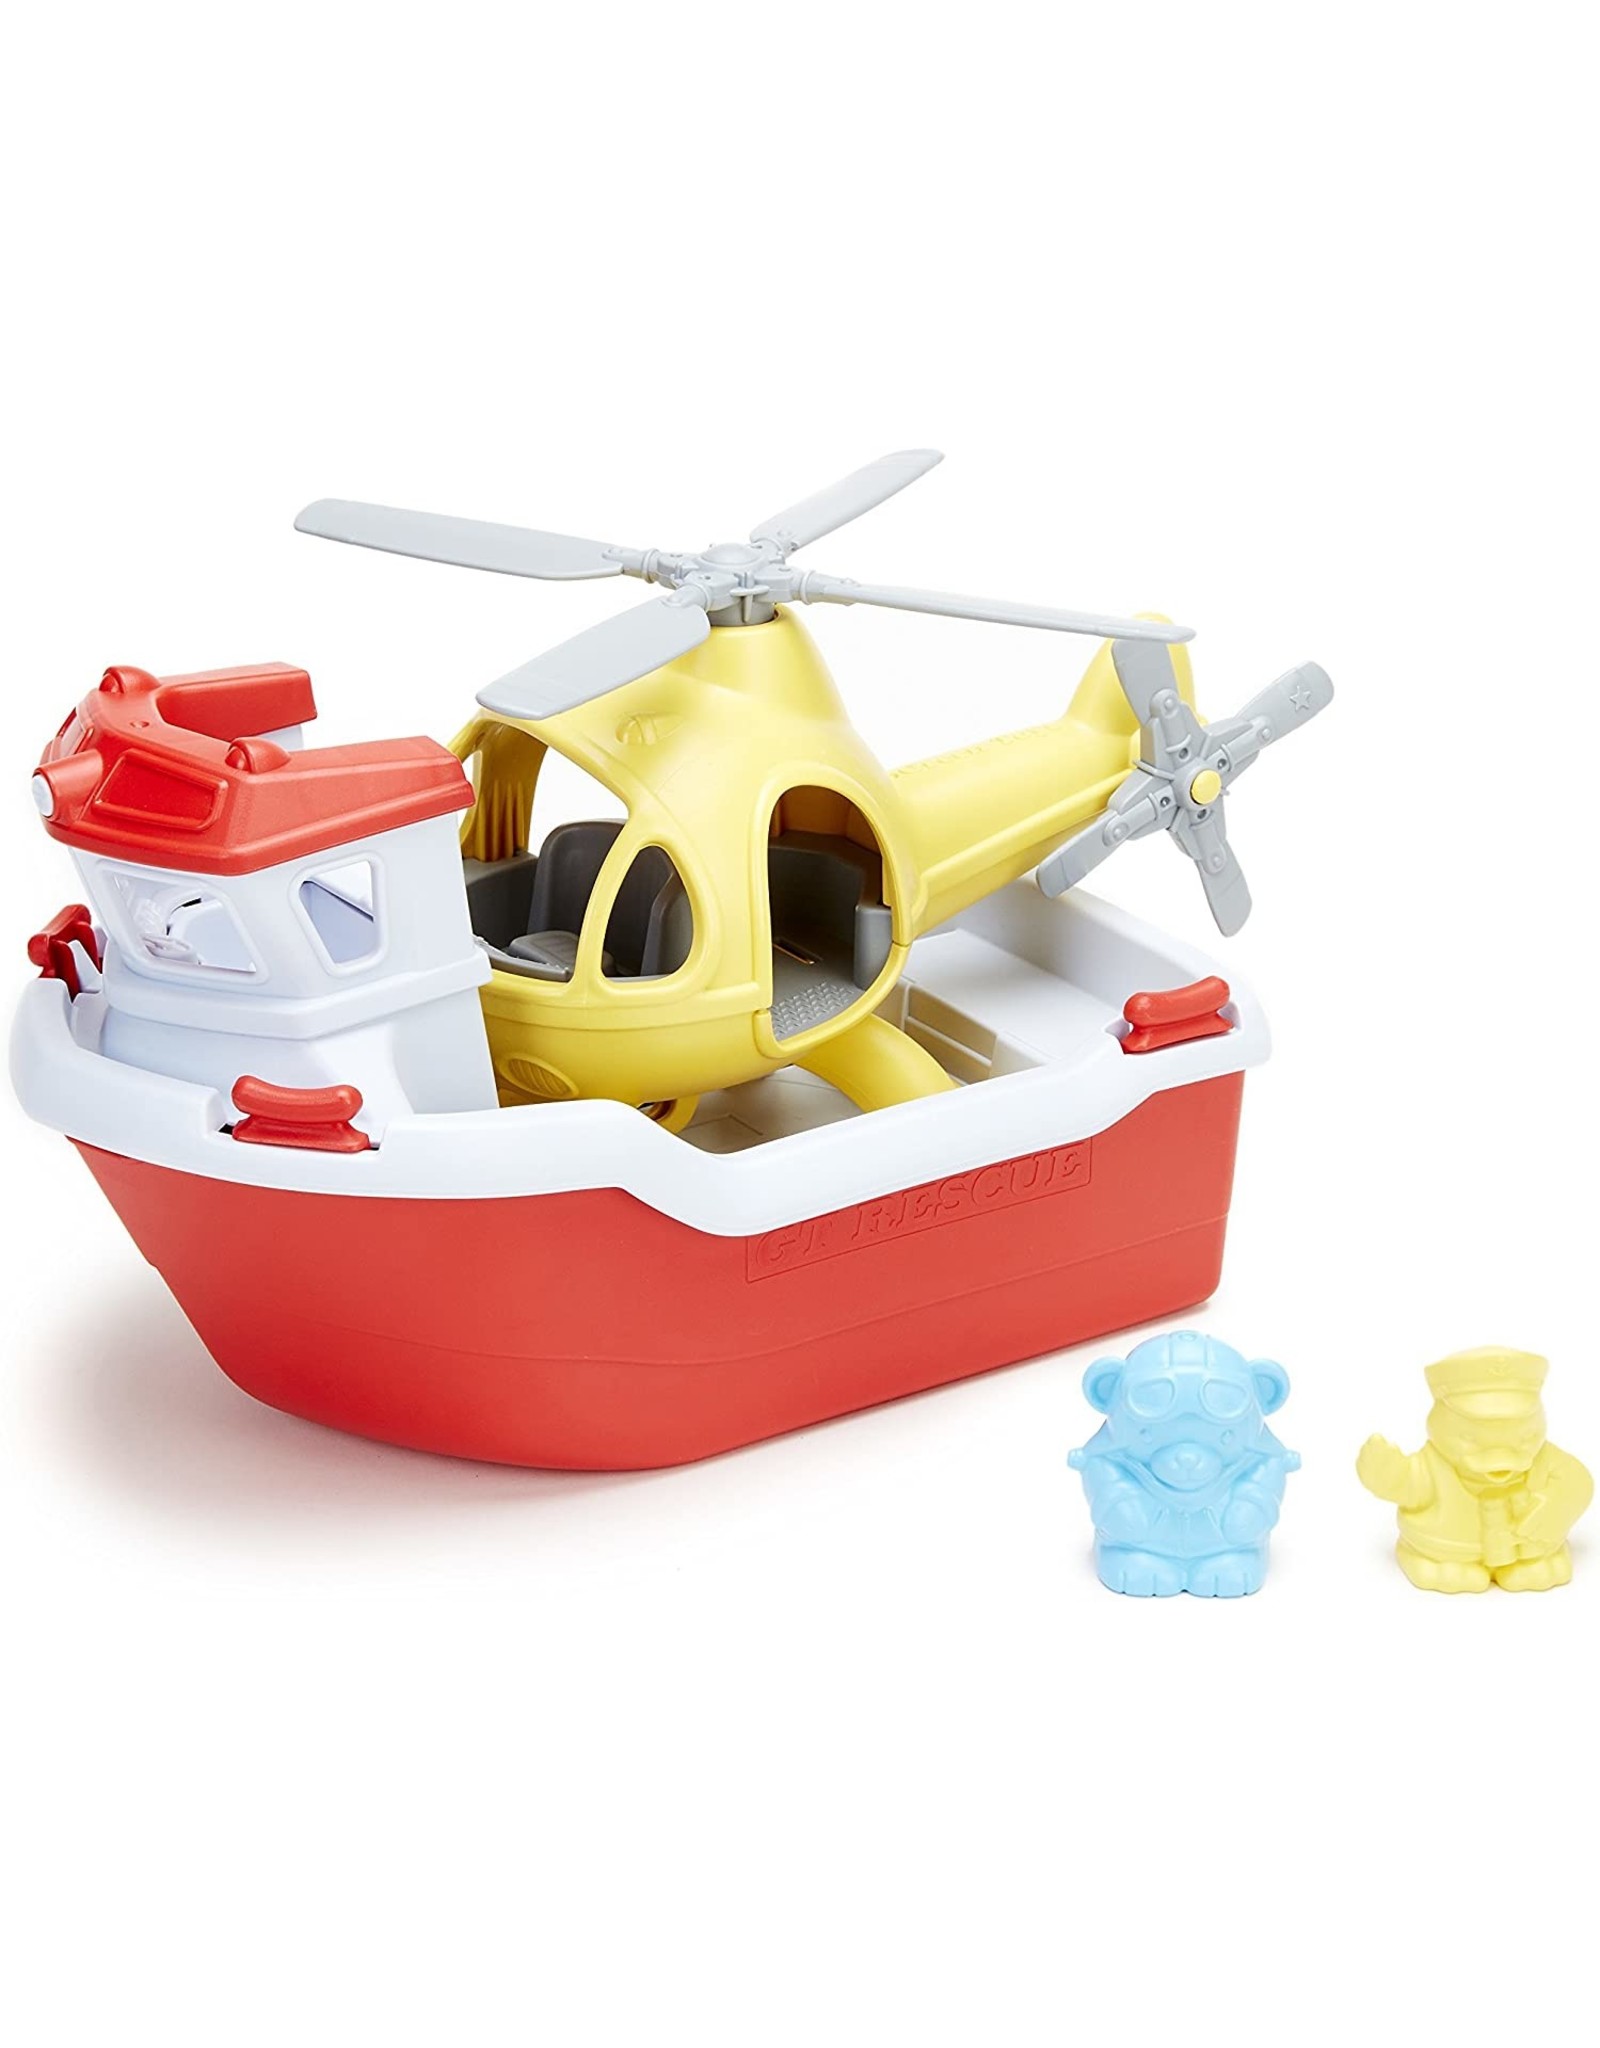 Rescue Boat & Helicopter